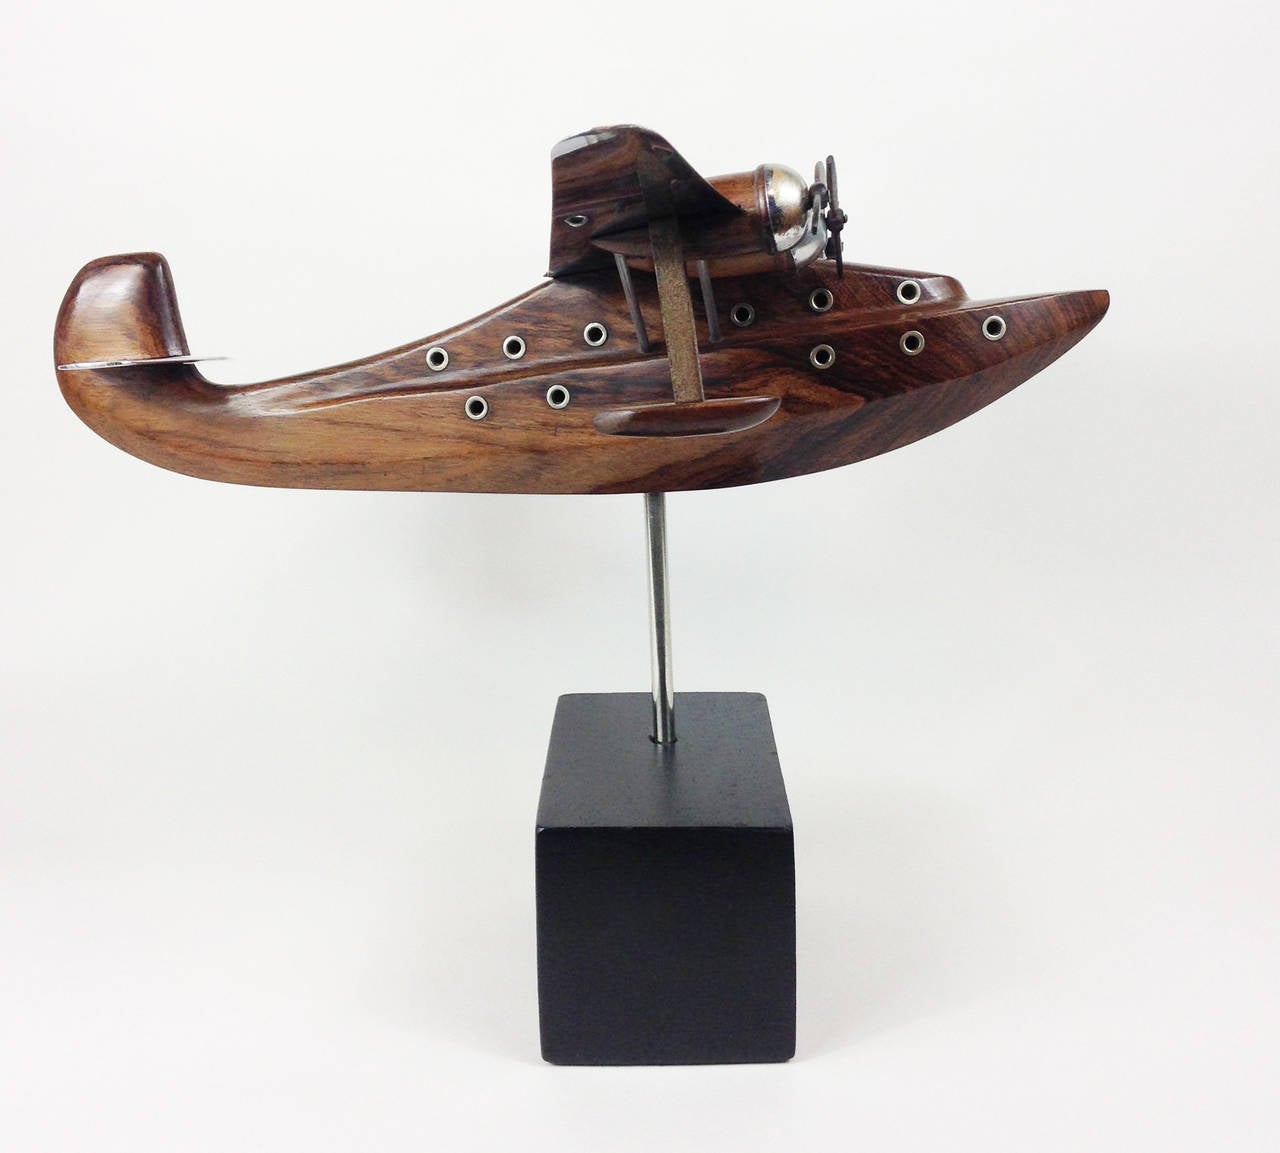 British Rosewood and Chrome Flying Boat Model, circa 1930